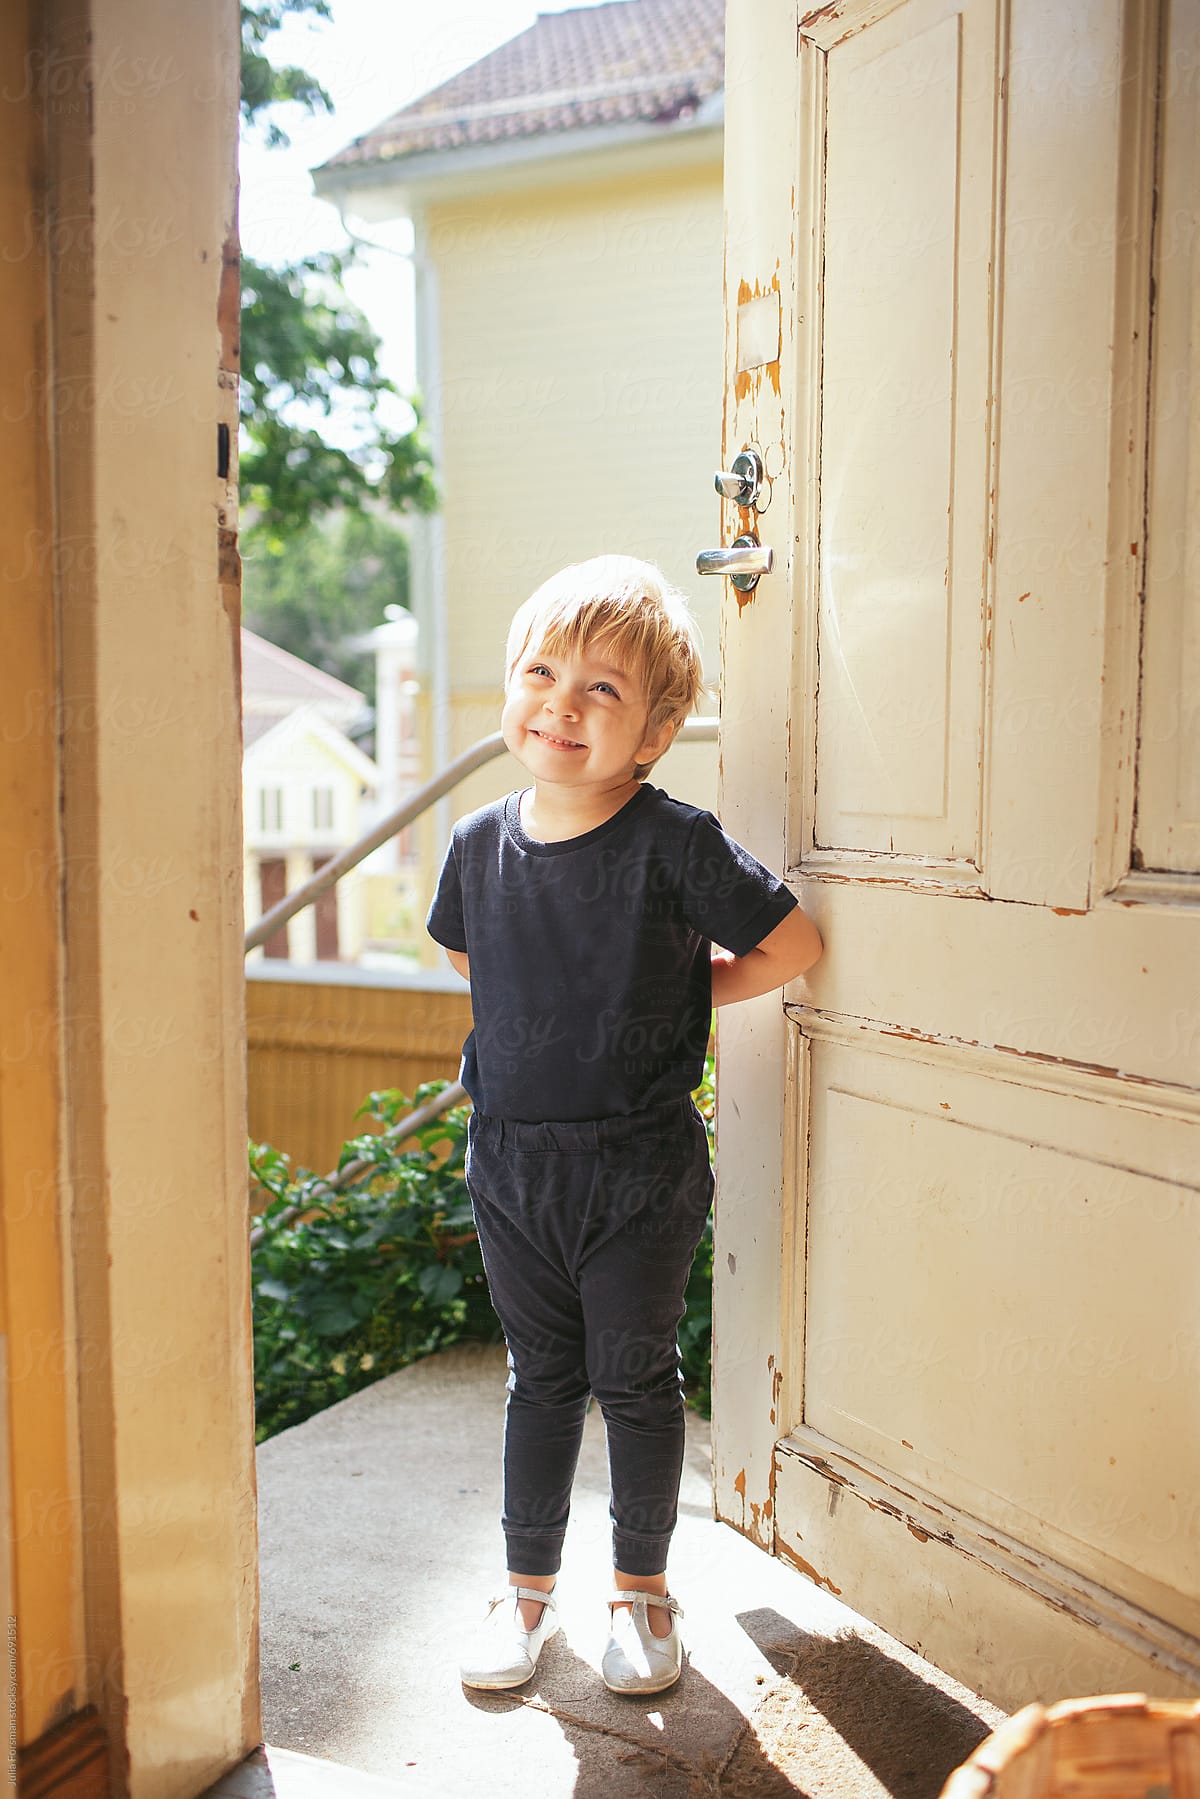 Cute, happy little child saying hello at the front door of a house.